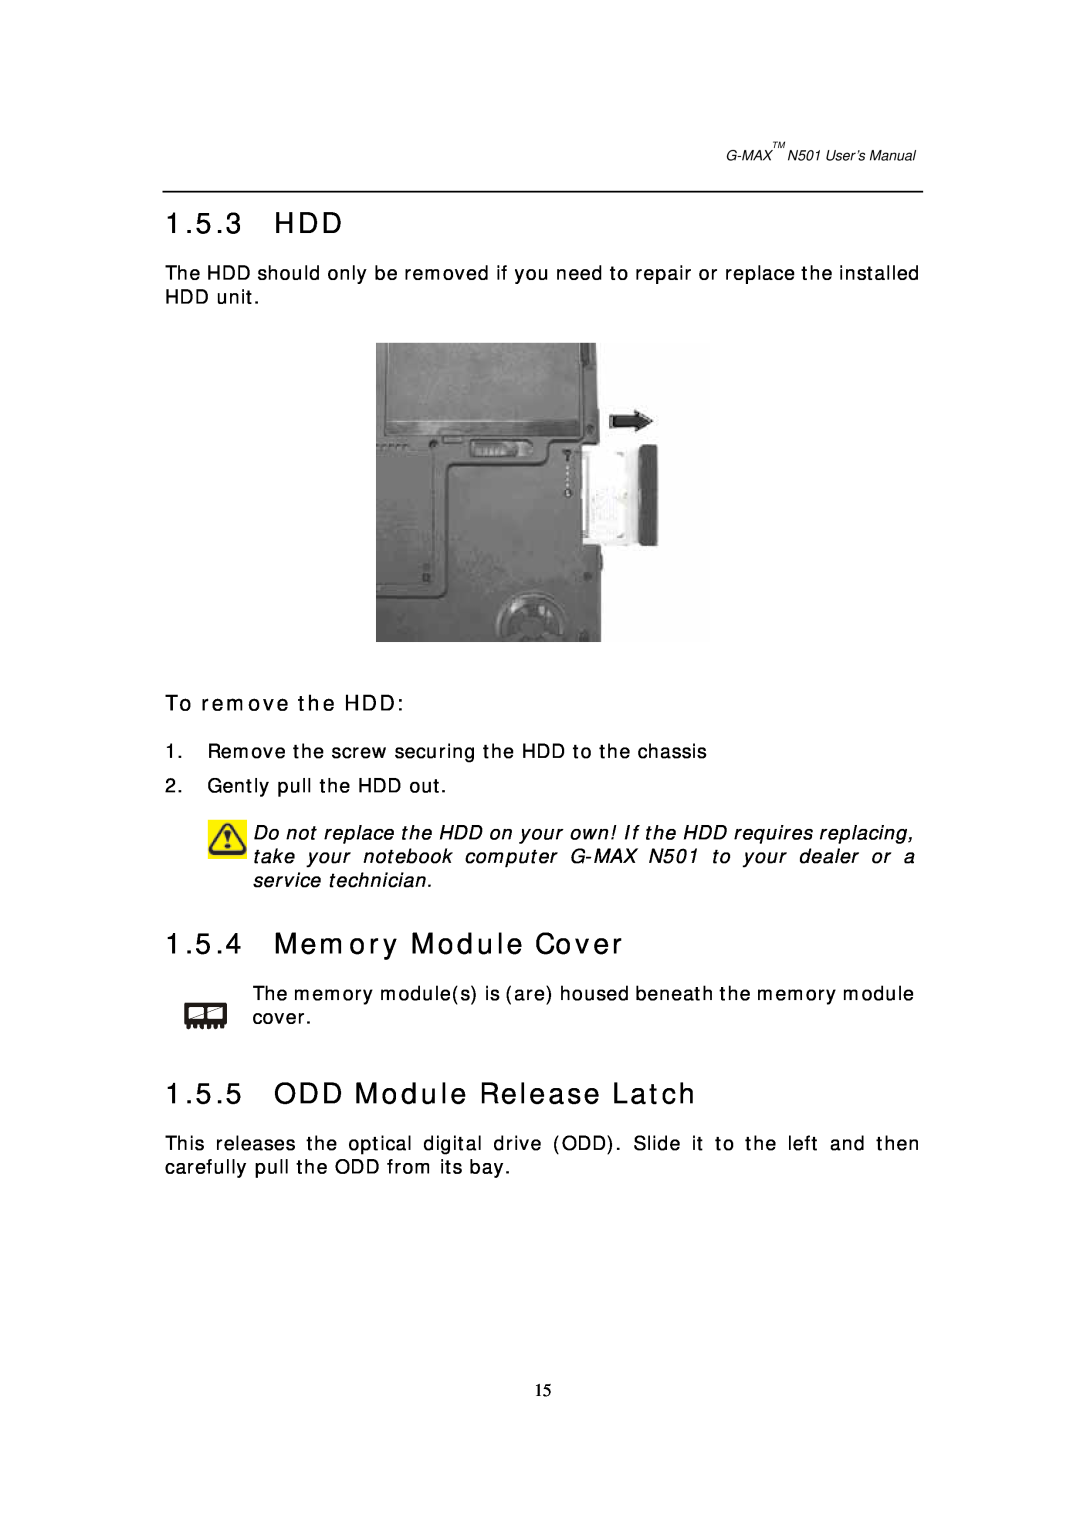 Gigabyte G-MAX N501 user manual 1.5.3 HDD, Memory Module Cover, ODD Module Release Latch, To remove the HDD 